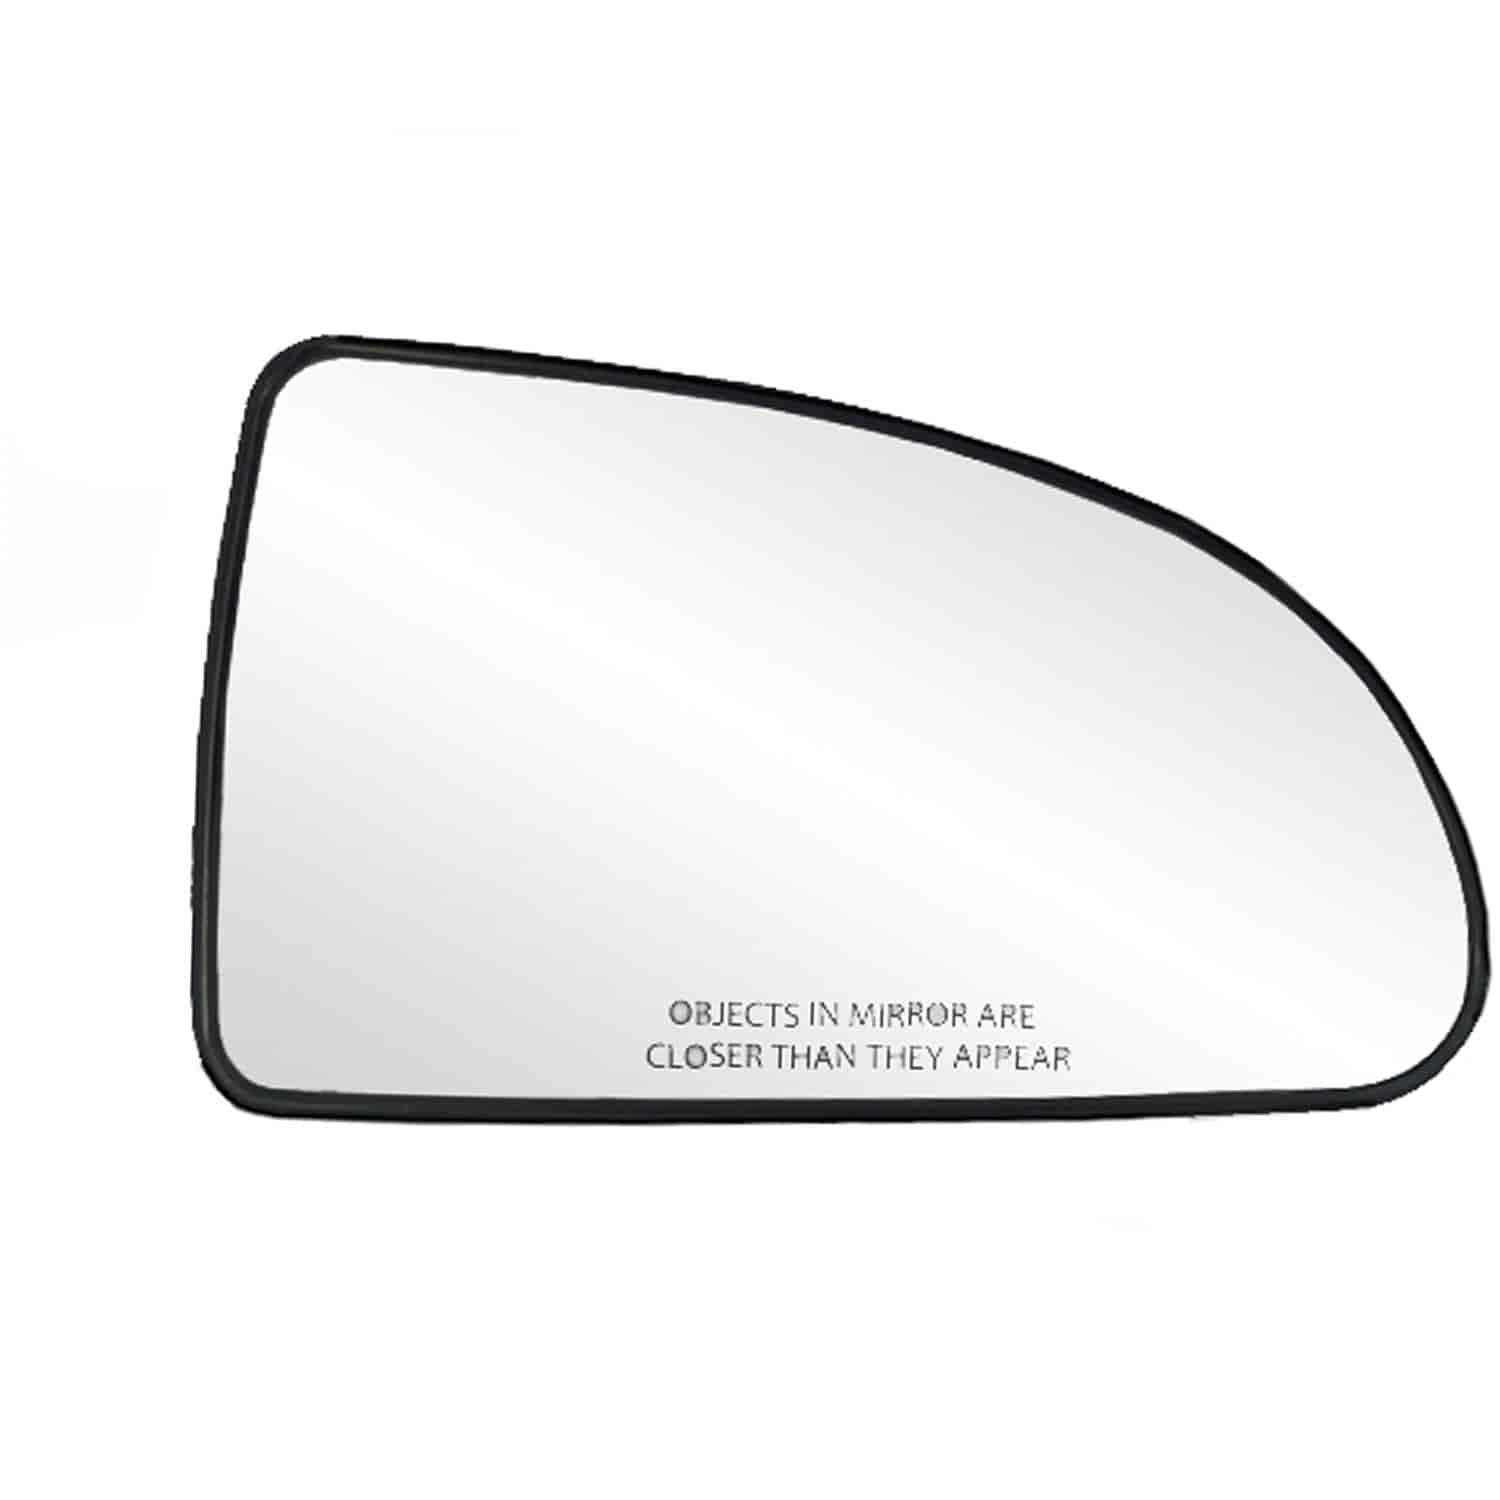 Replacement Glass Assembly for 05-10 Cobalt; 07-09 G5 replace your cracked or broken passenger side